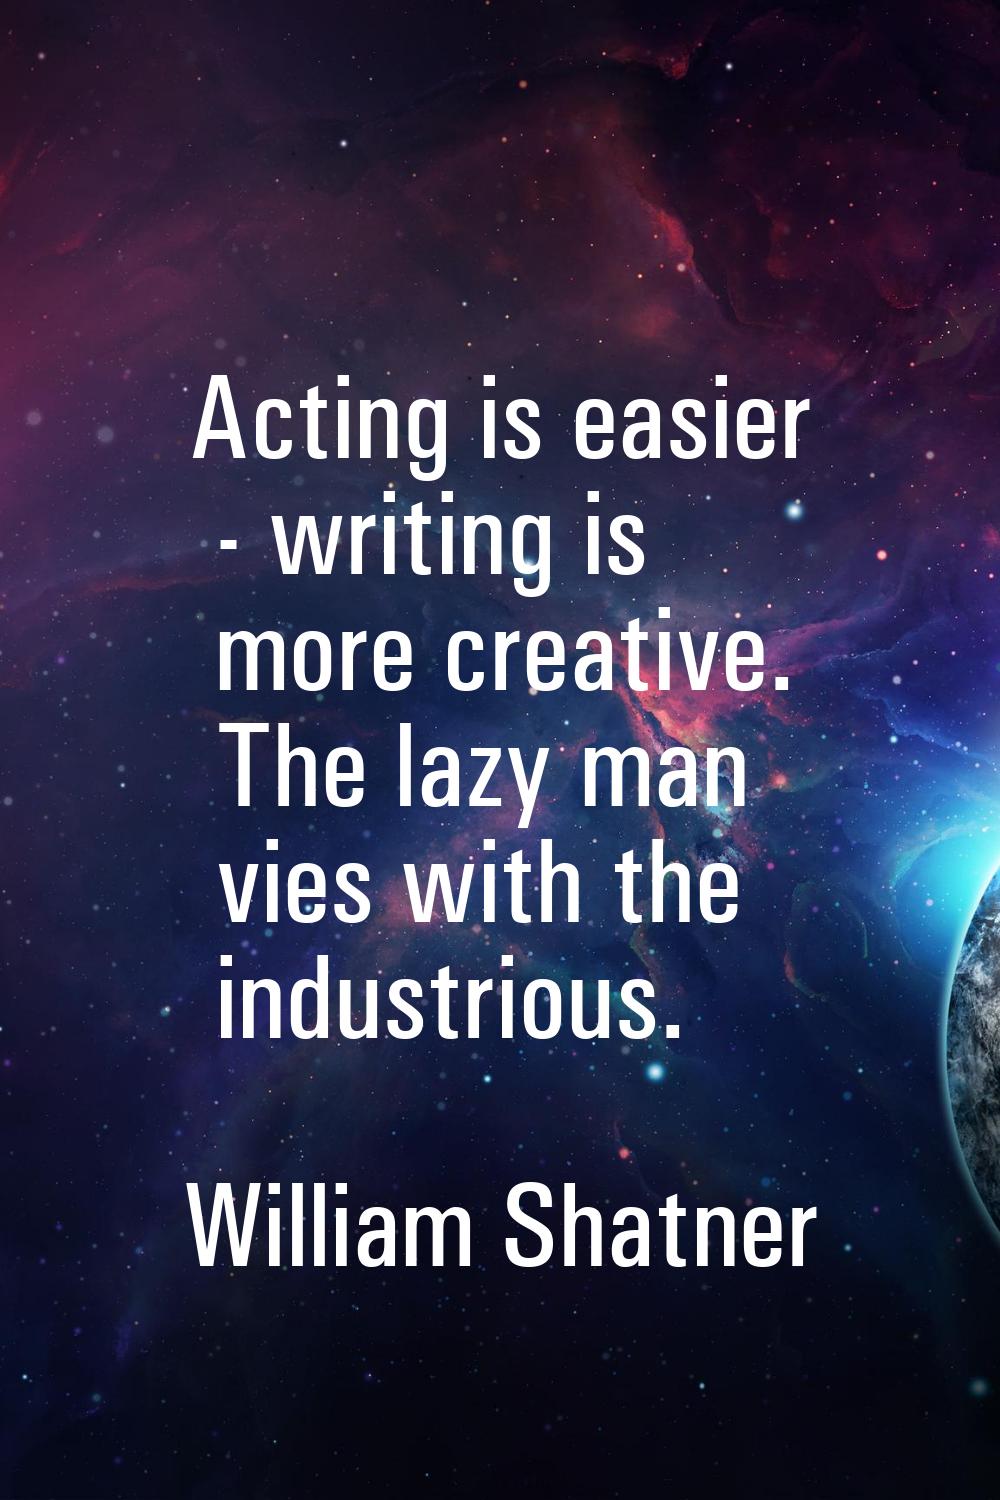 Acting is easier - writing is more creative. The lazy man vies with the industrious.